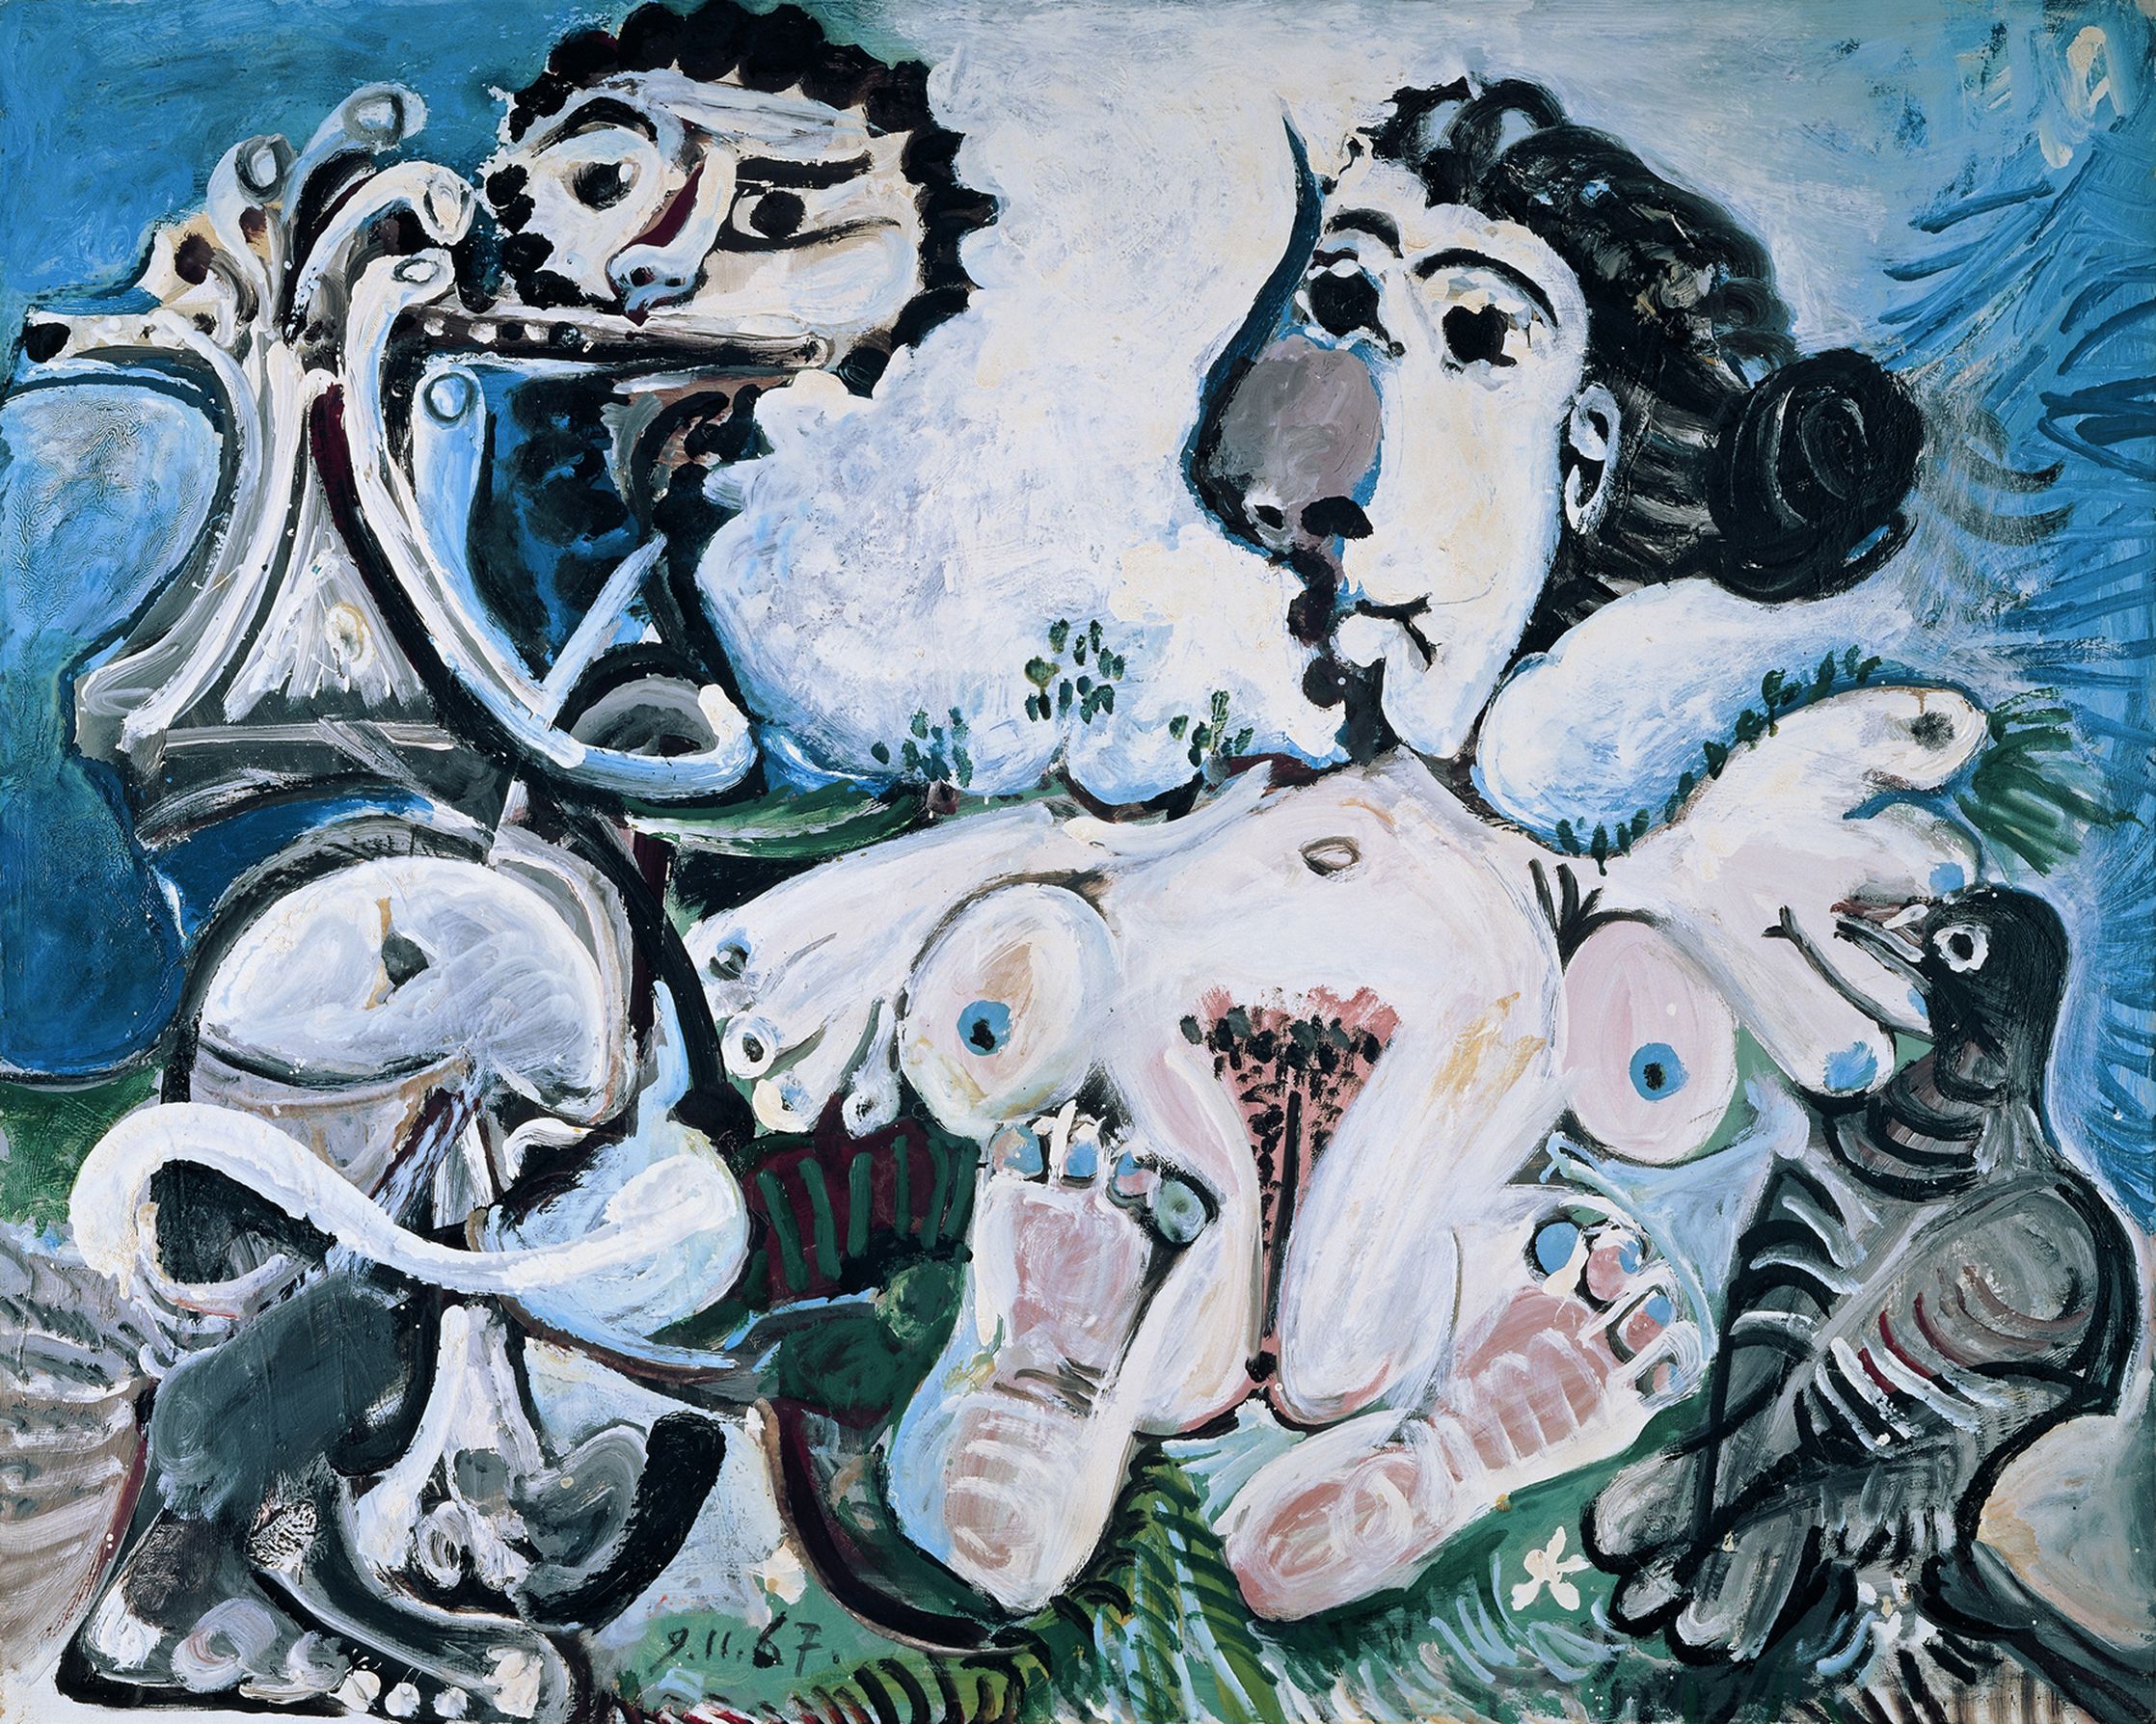 Pablo Picasso, Nude Woman with Bird and Flute Player, 1967. Albertina, Vienna – The Batliner Collection © Succession Picasso Bildrecht, Vienna 2023